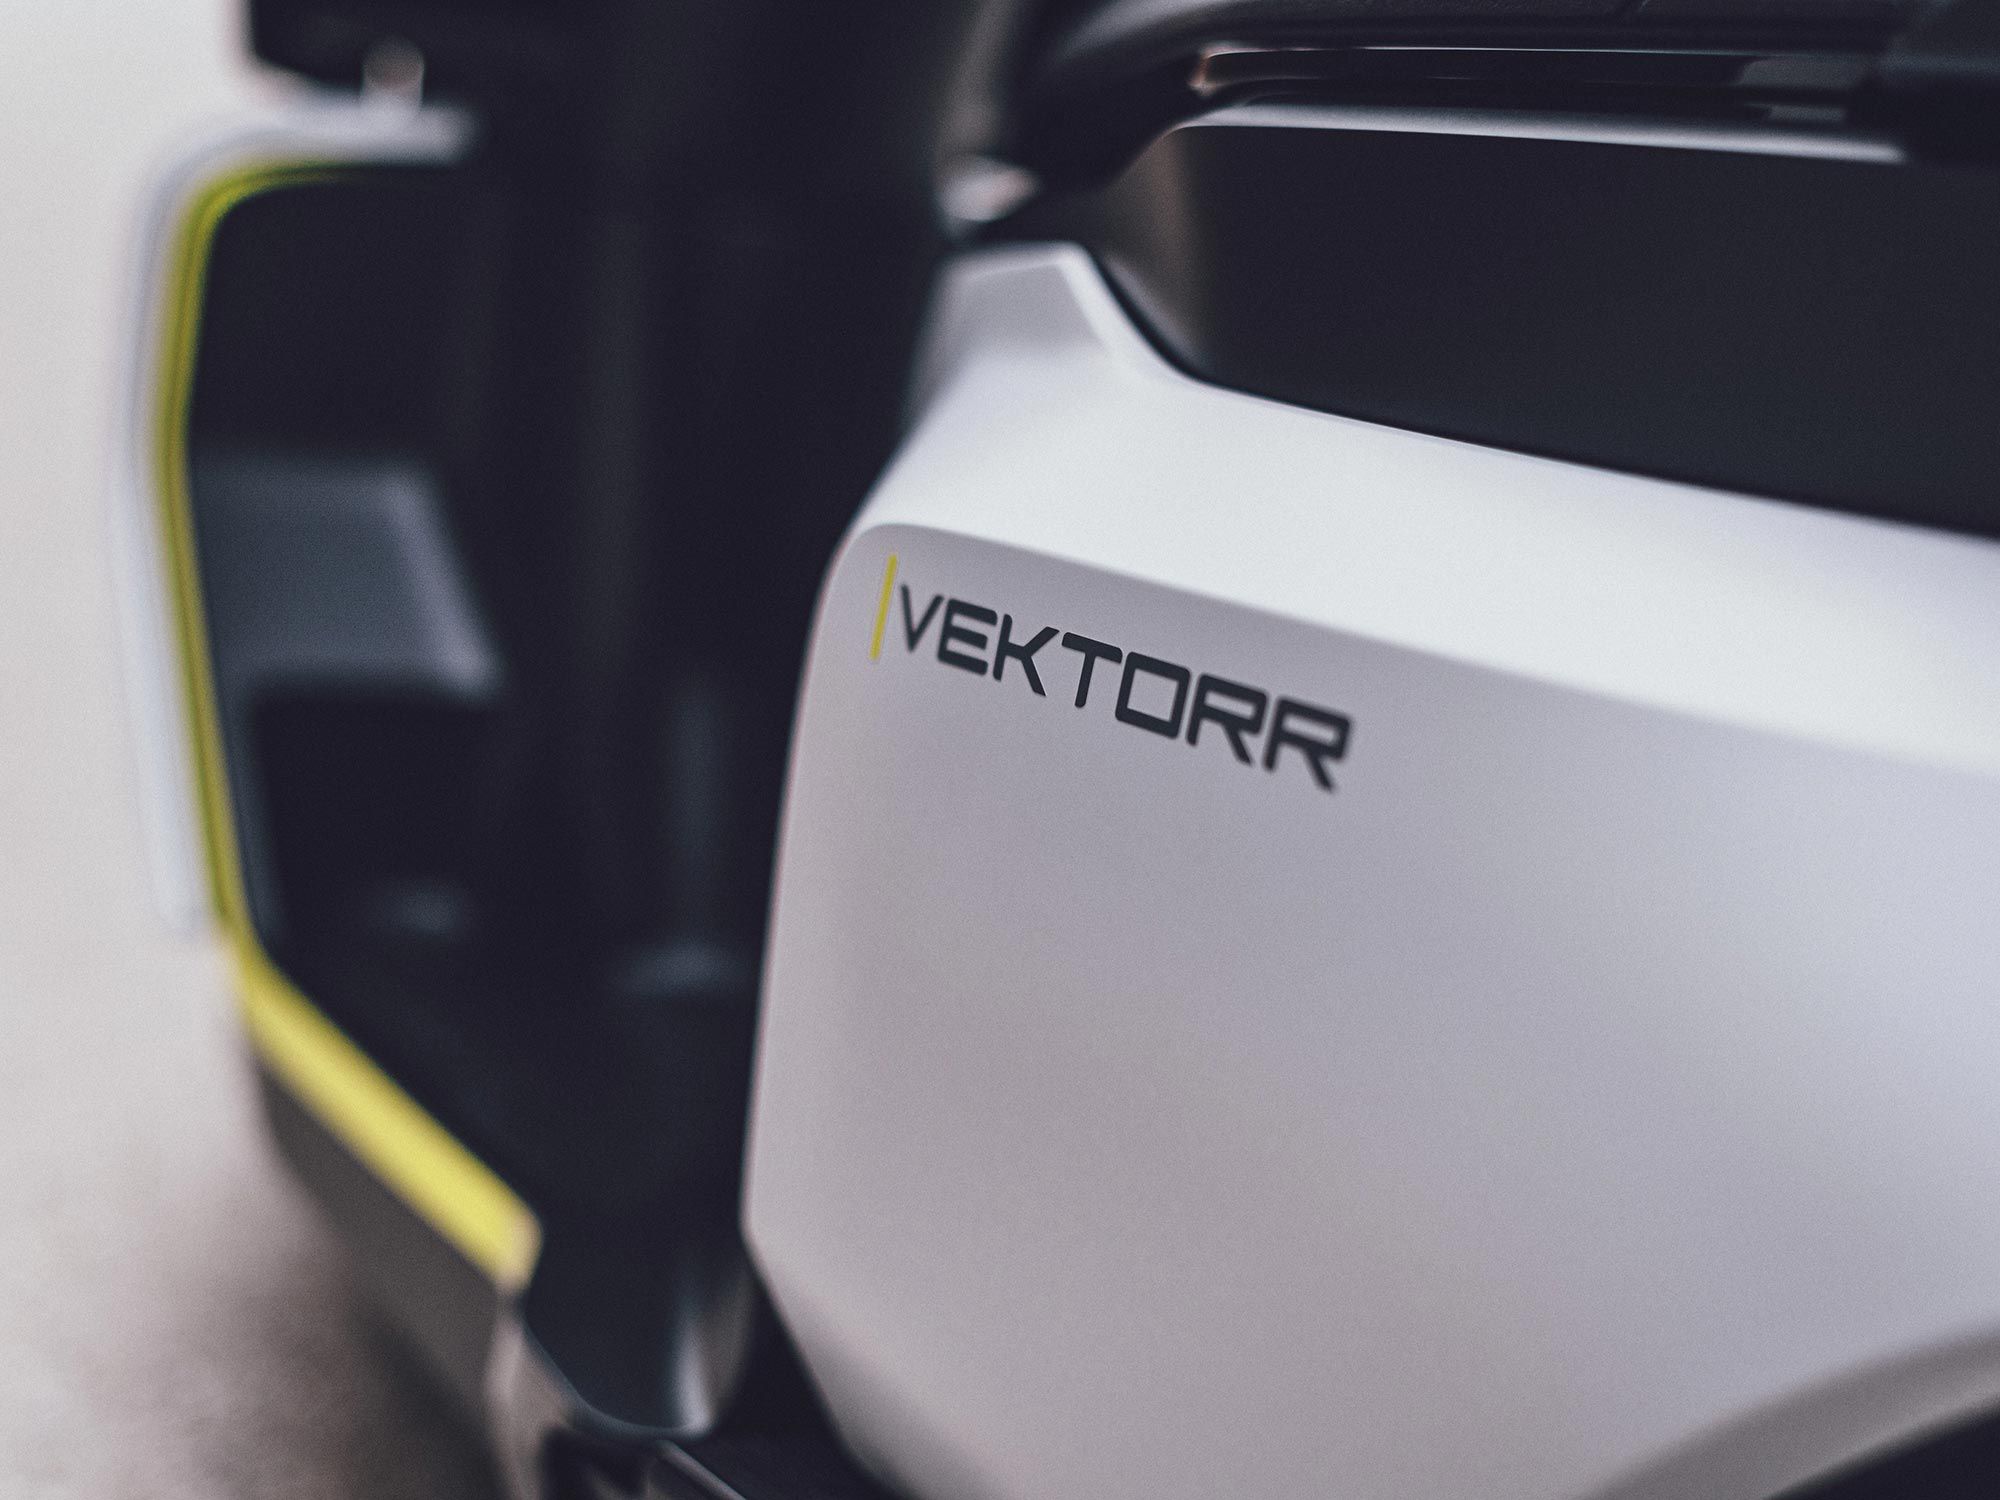 The Vektorr will be aesthetically right at home with rides like the E-Pilen and others.